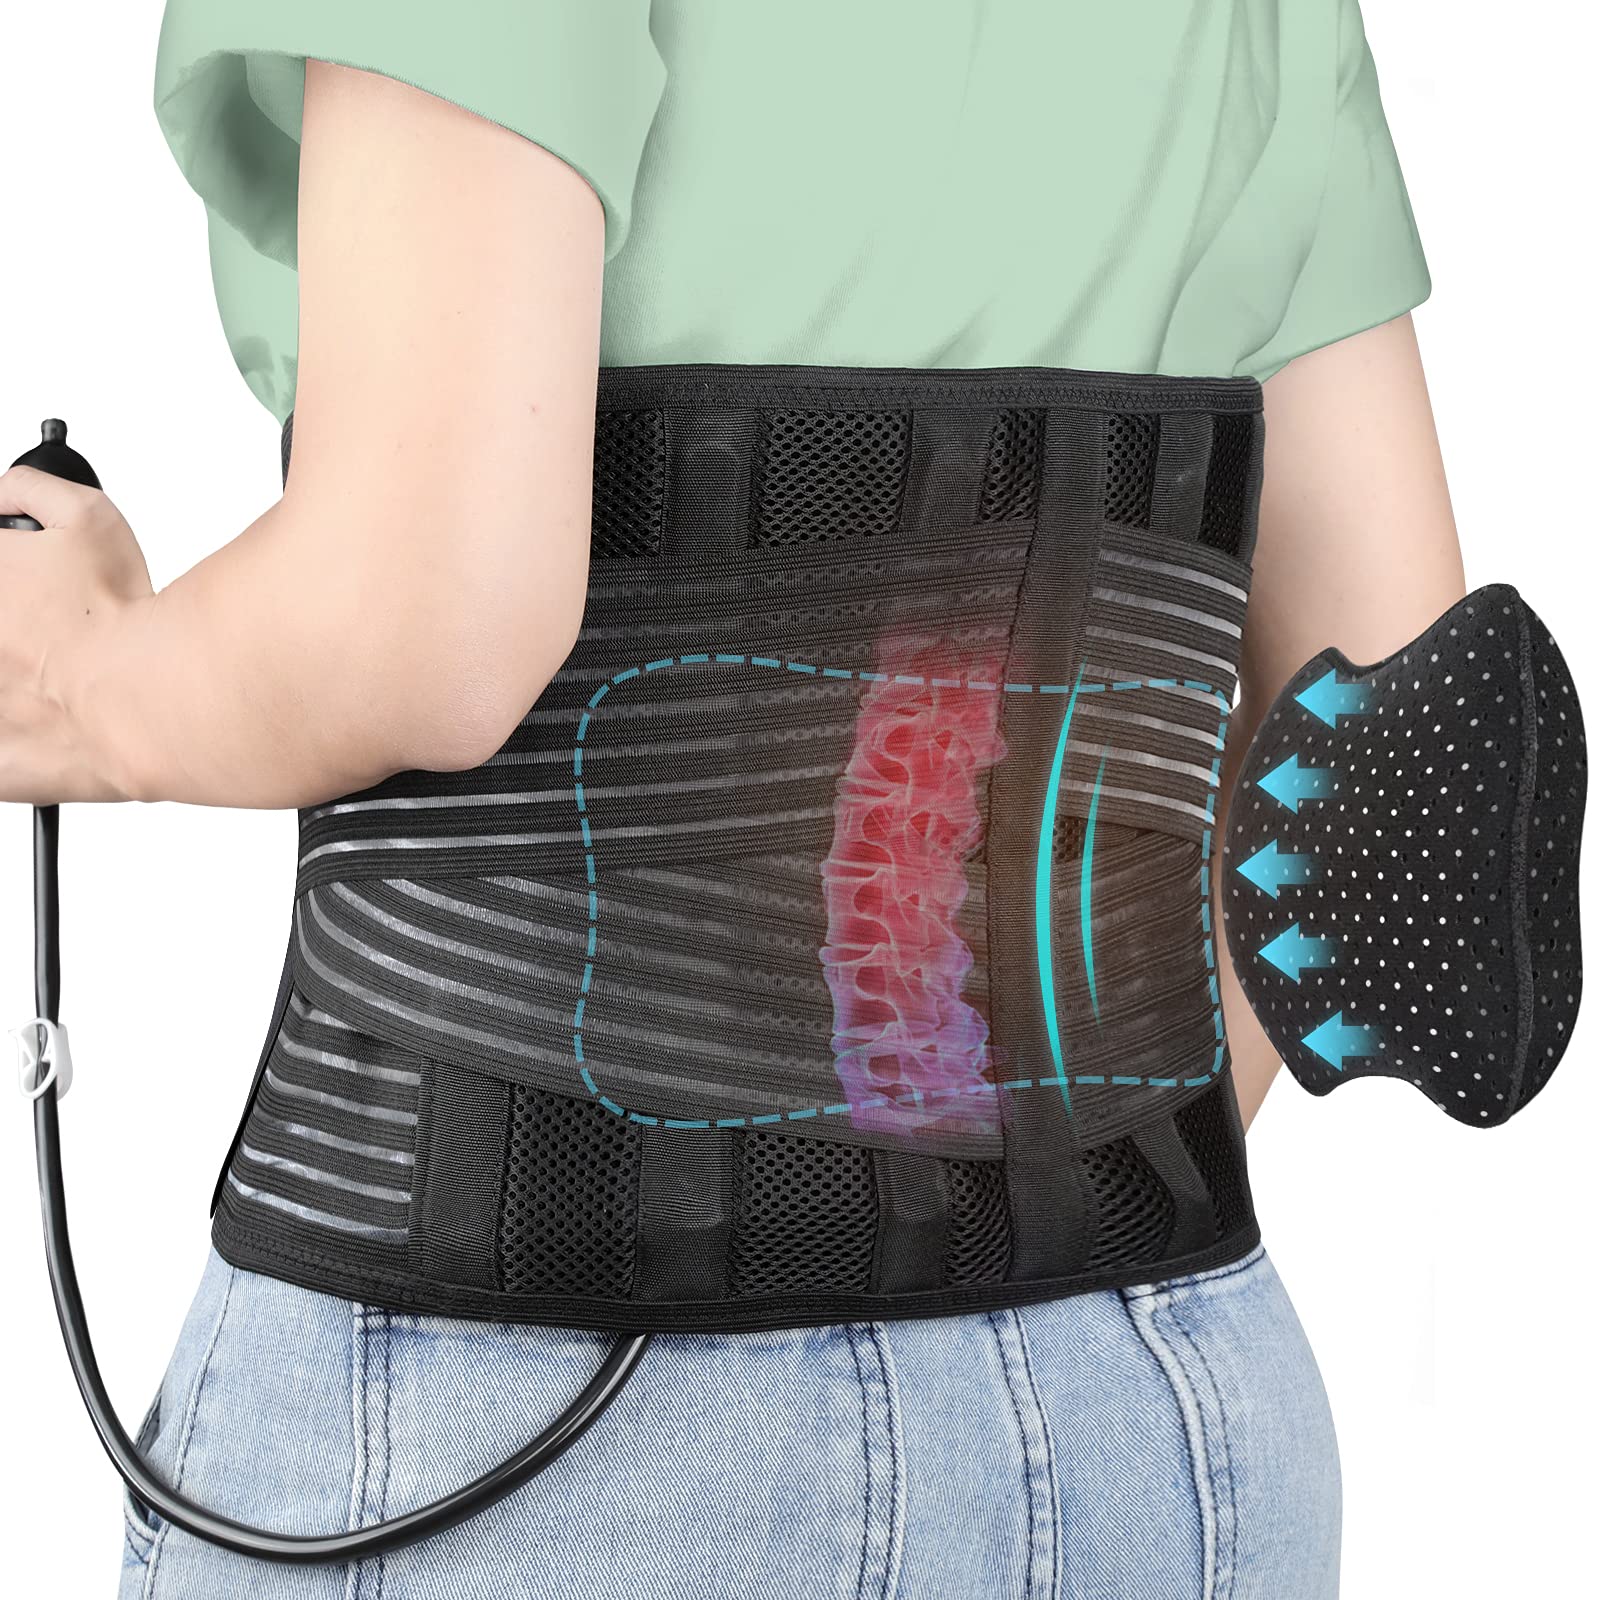 Womens Back Brace for Lower Pain Relief & Herniated Disc Sciatica,Back  Support Belt for Lifting at Work Scoliosis,Black,M